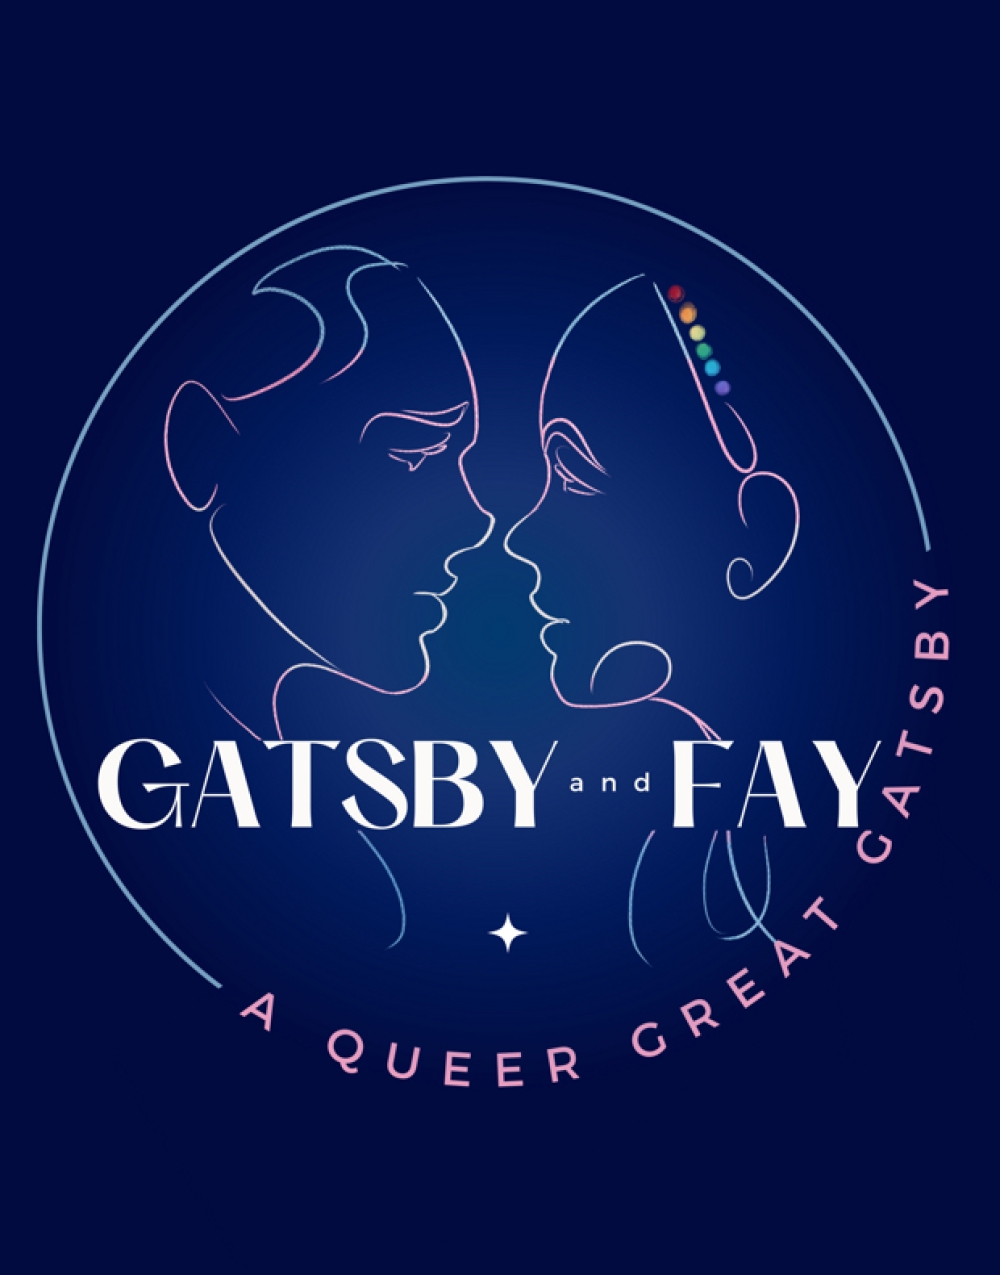 Gatsby and Fay: A Queer Great Gatsby - SEDOS Open Week Stage Mag